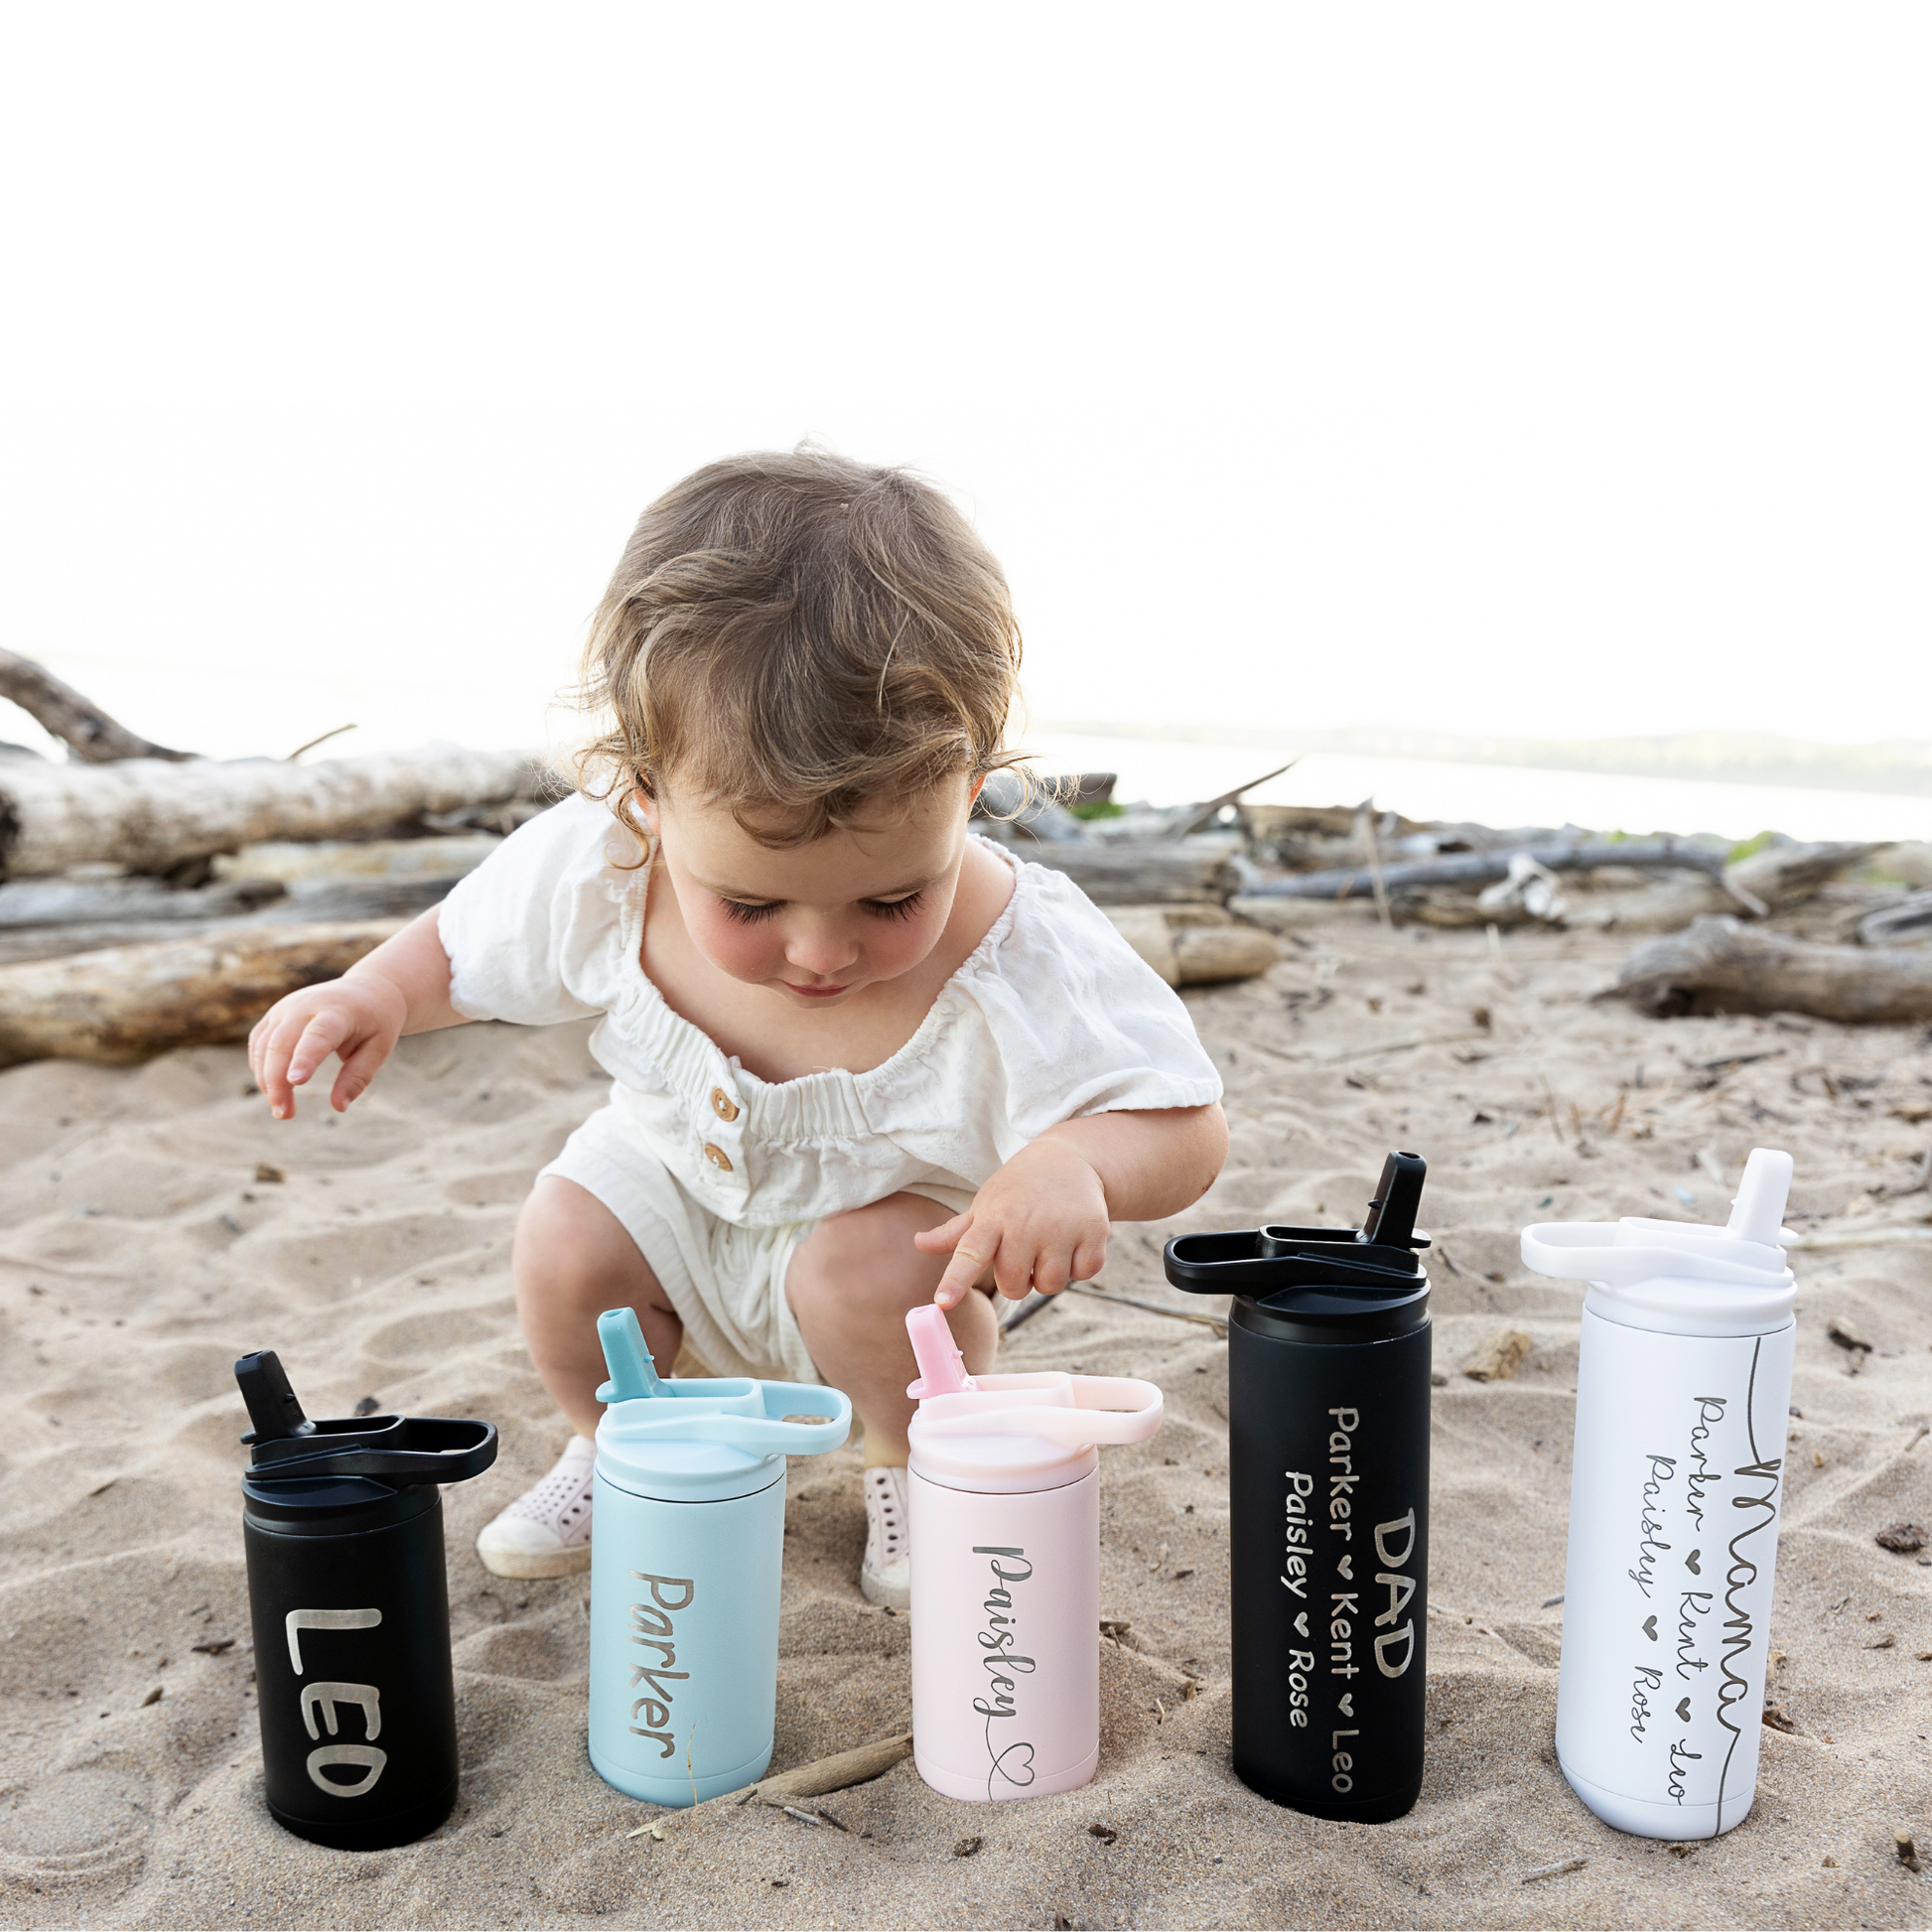 Engraved Kids Water Bottle,personalized Tumbler for Kids,water Bottles With  Names, Custom Kids Cup, 12 Oz Stainless Steel Metal Tumbler Cup 